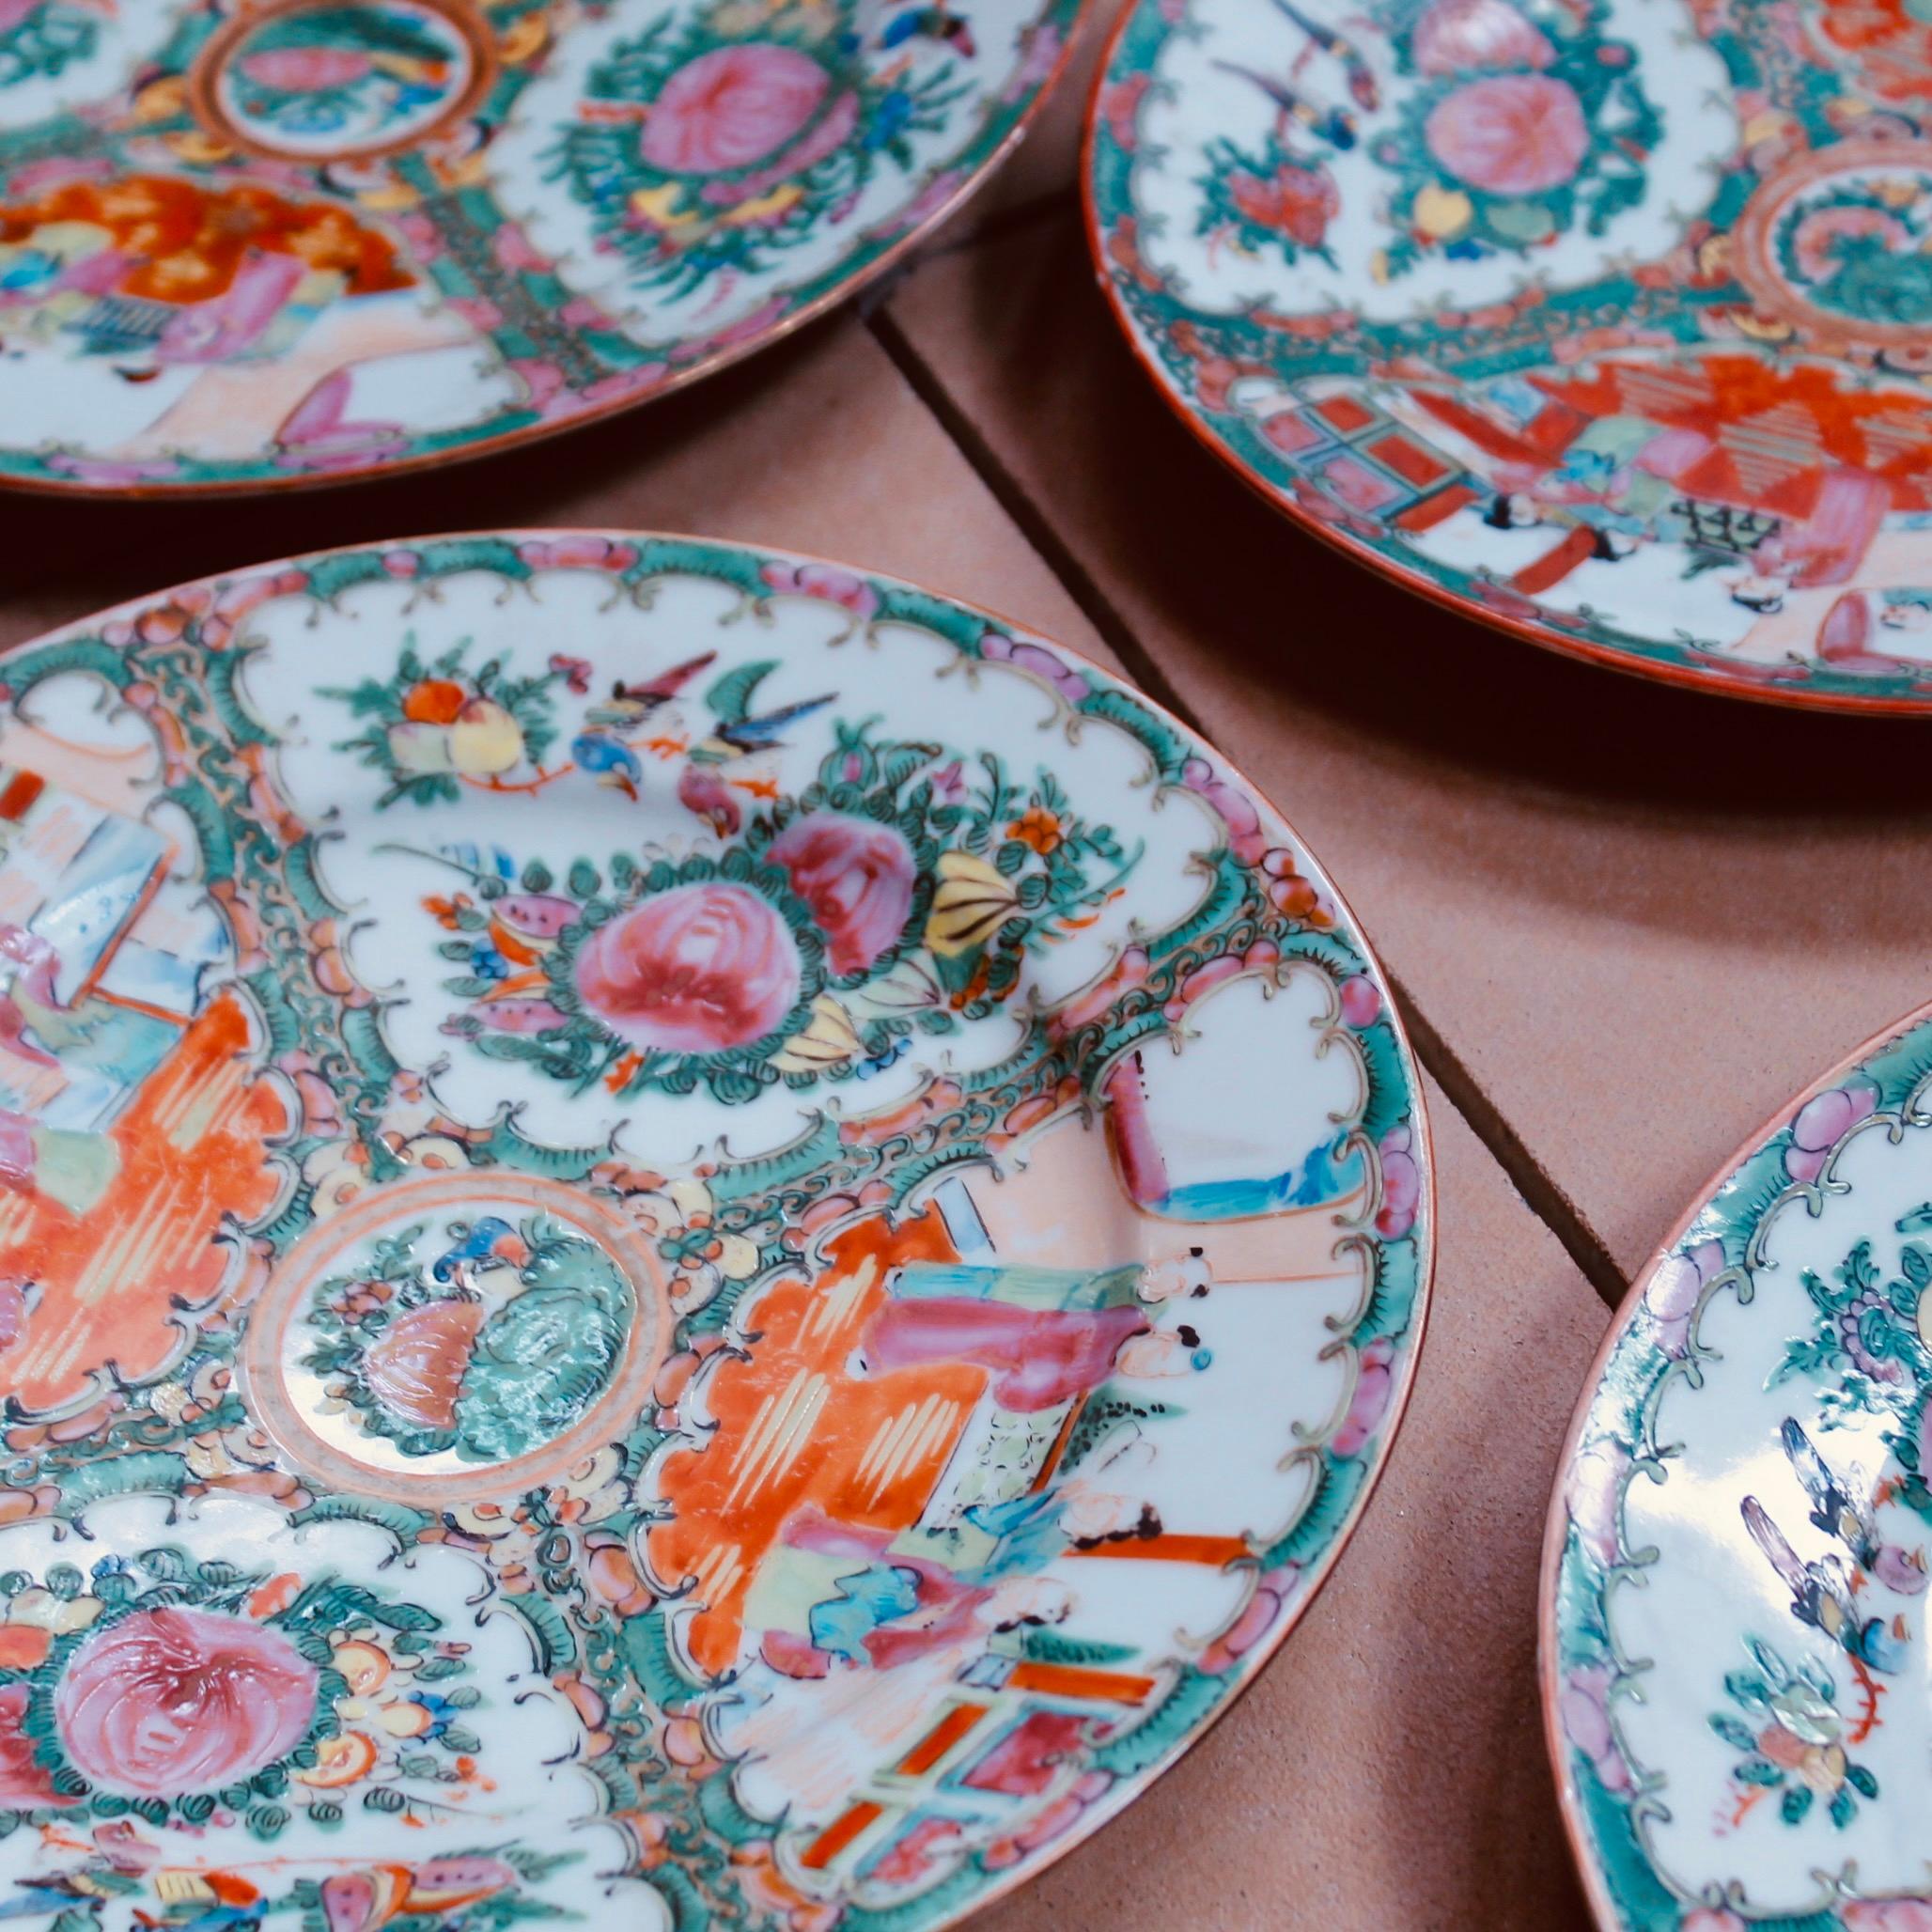 An assembled set of ten Rose Medallion dinner plates, good quality and well matched with some variations of color and design among them. These date probably to the early 20th century, ca. 1915, all bearing one of two designs of red oxide glazed